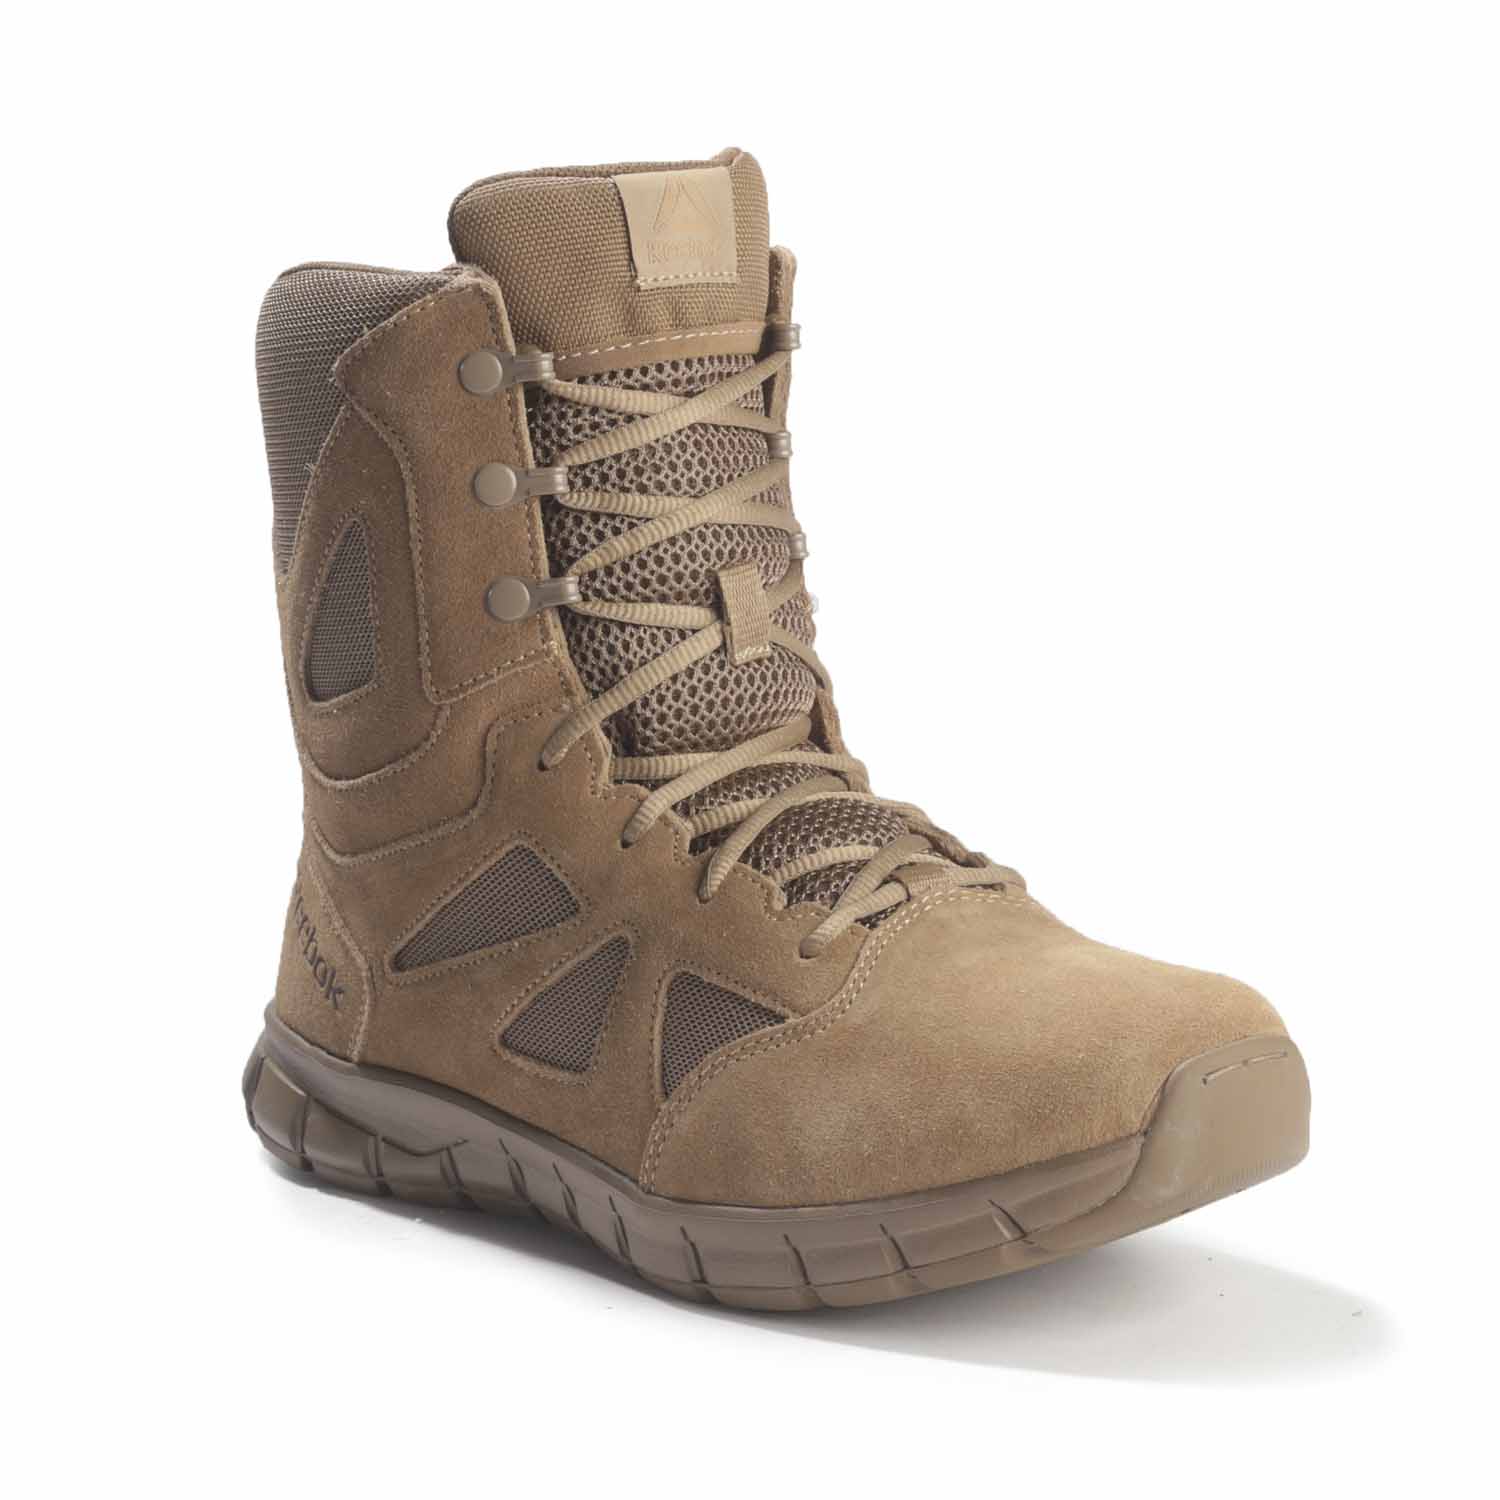 Reebok Duty Sublite Cushion Tactical 8" Boot (Coyote)